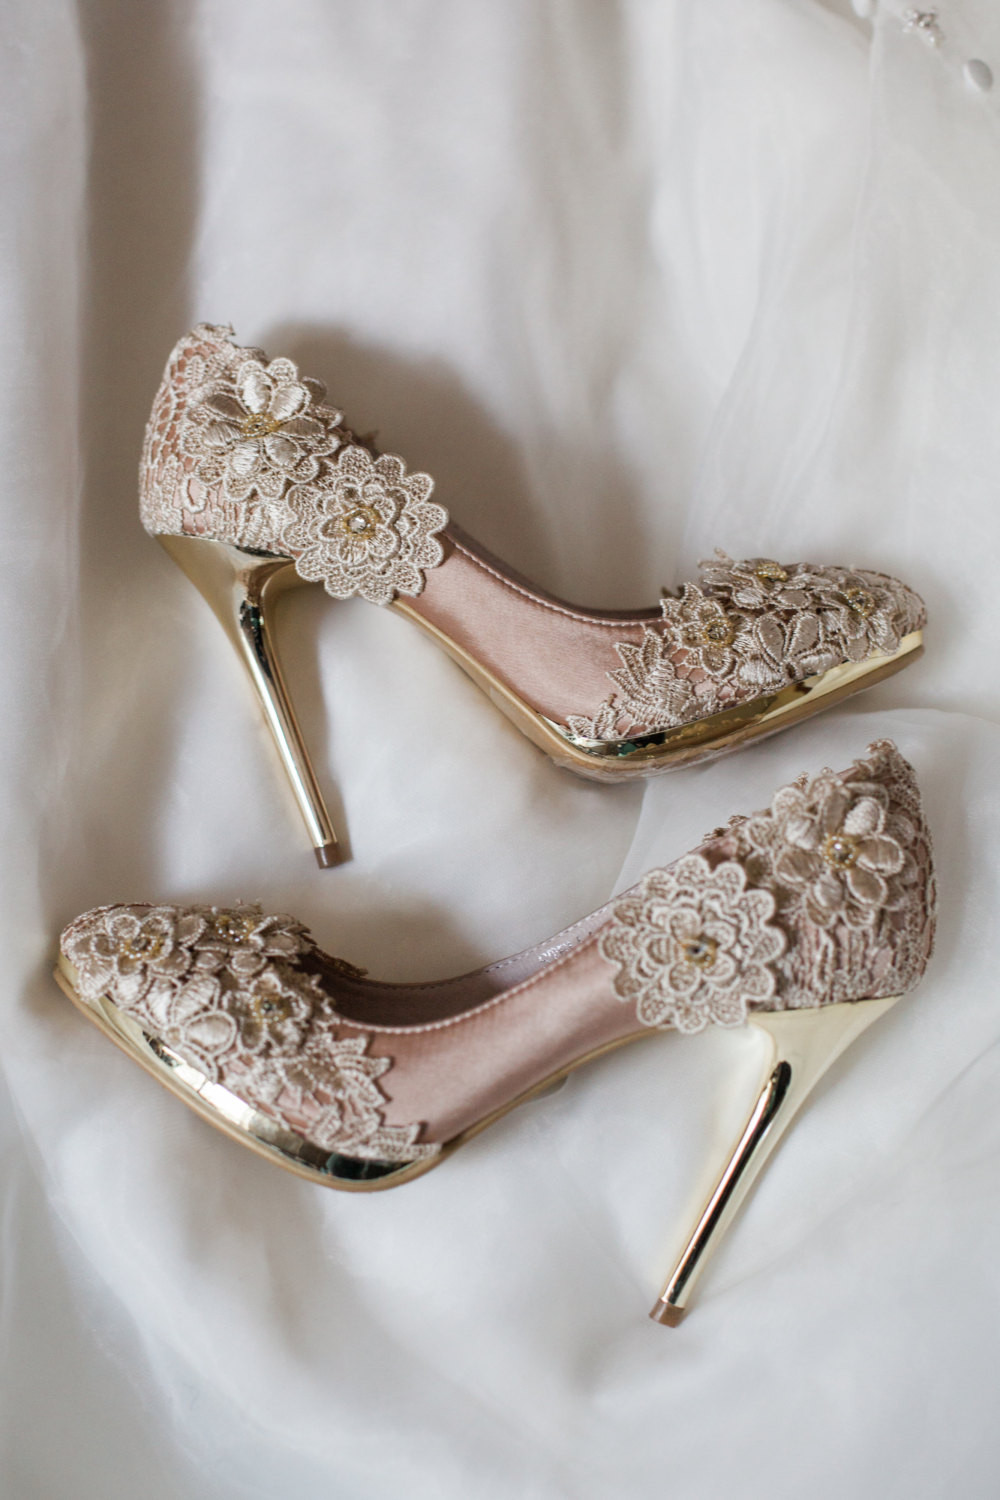 Wedding Shoes Lace
 SALE Vintage Flower Lace Wedding Shoes with Champagne Gold